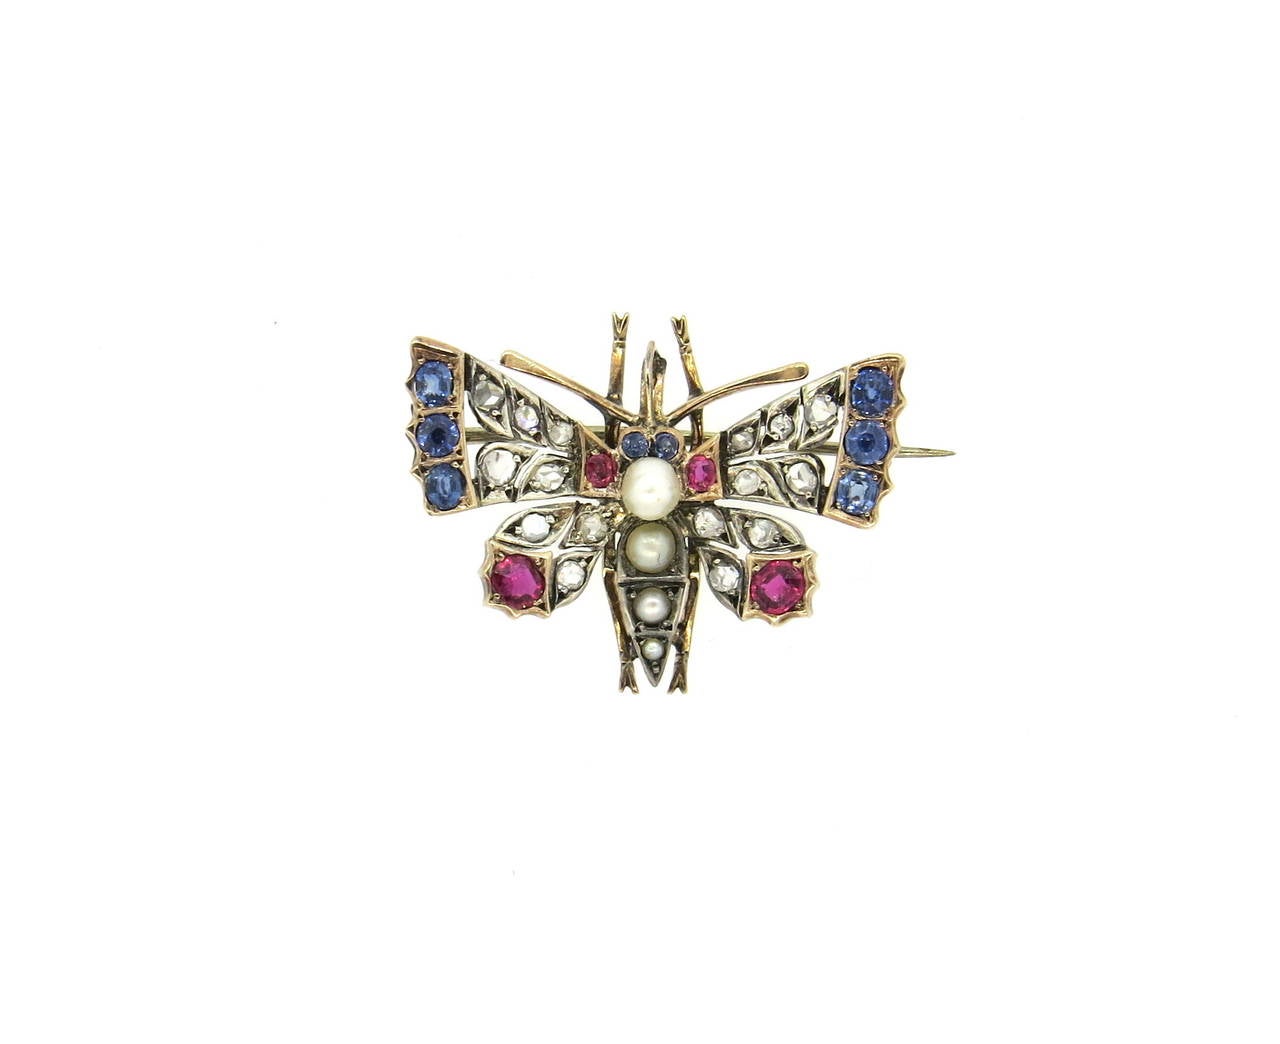 Antique 14k gold brooch pin, depicting a butterfly, set with rose cut diamonds, blue sapphires, rubies and pearls. Brooch measures 35mm x 28mm. Weight of the piece - 8.3 grams